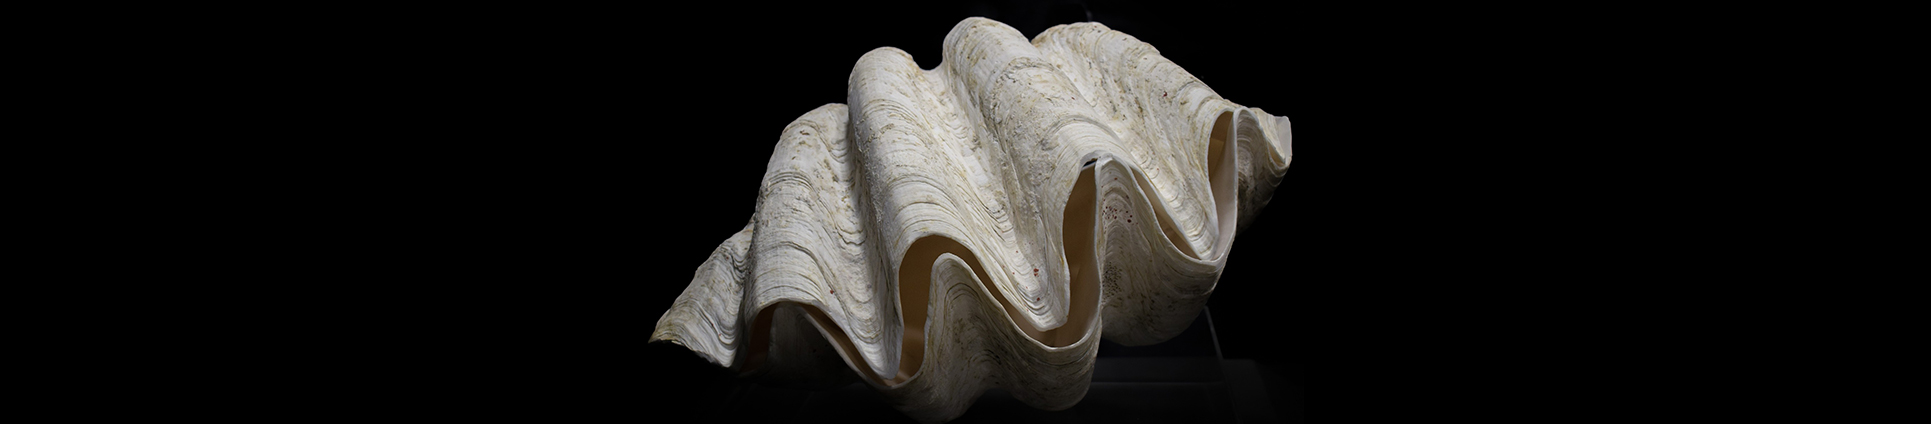 Giant-Clams_banner